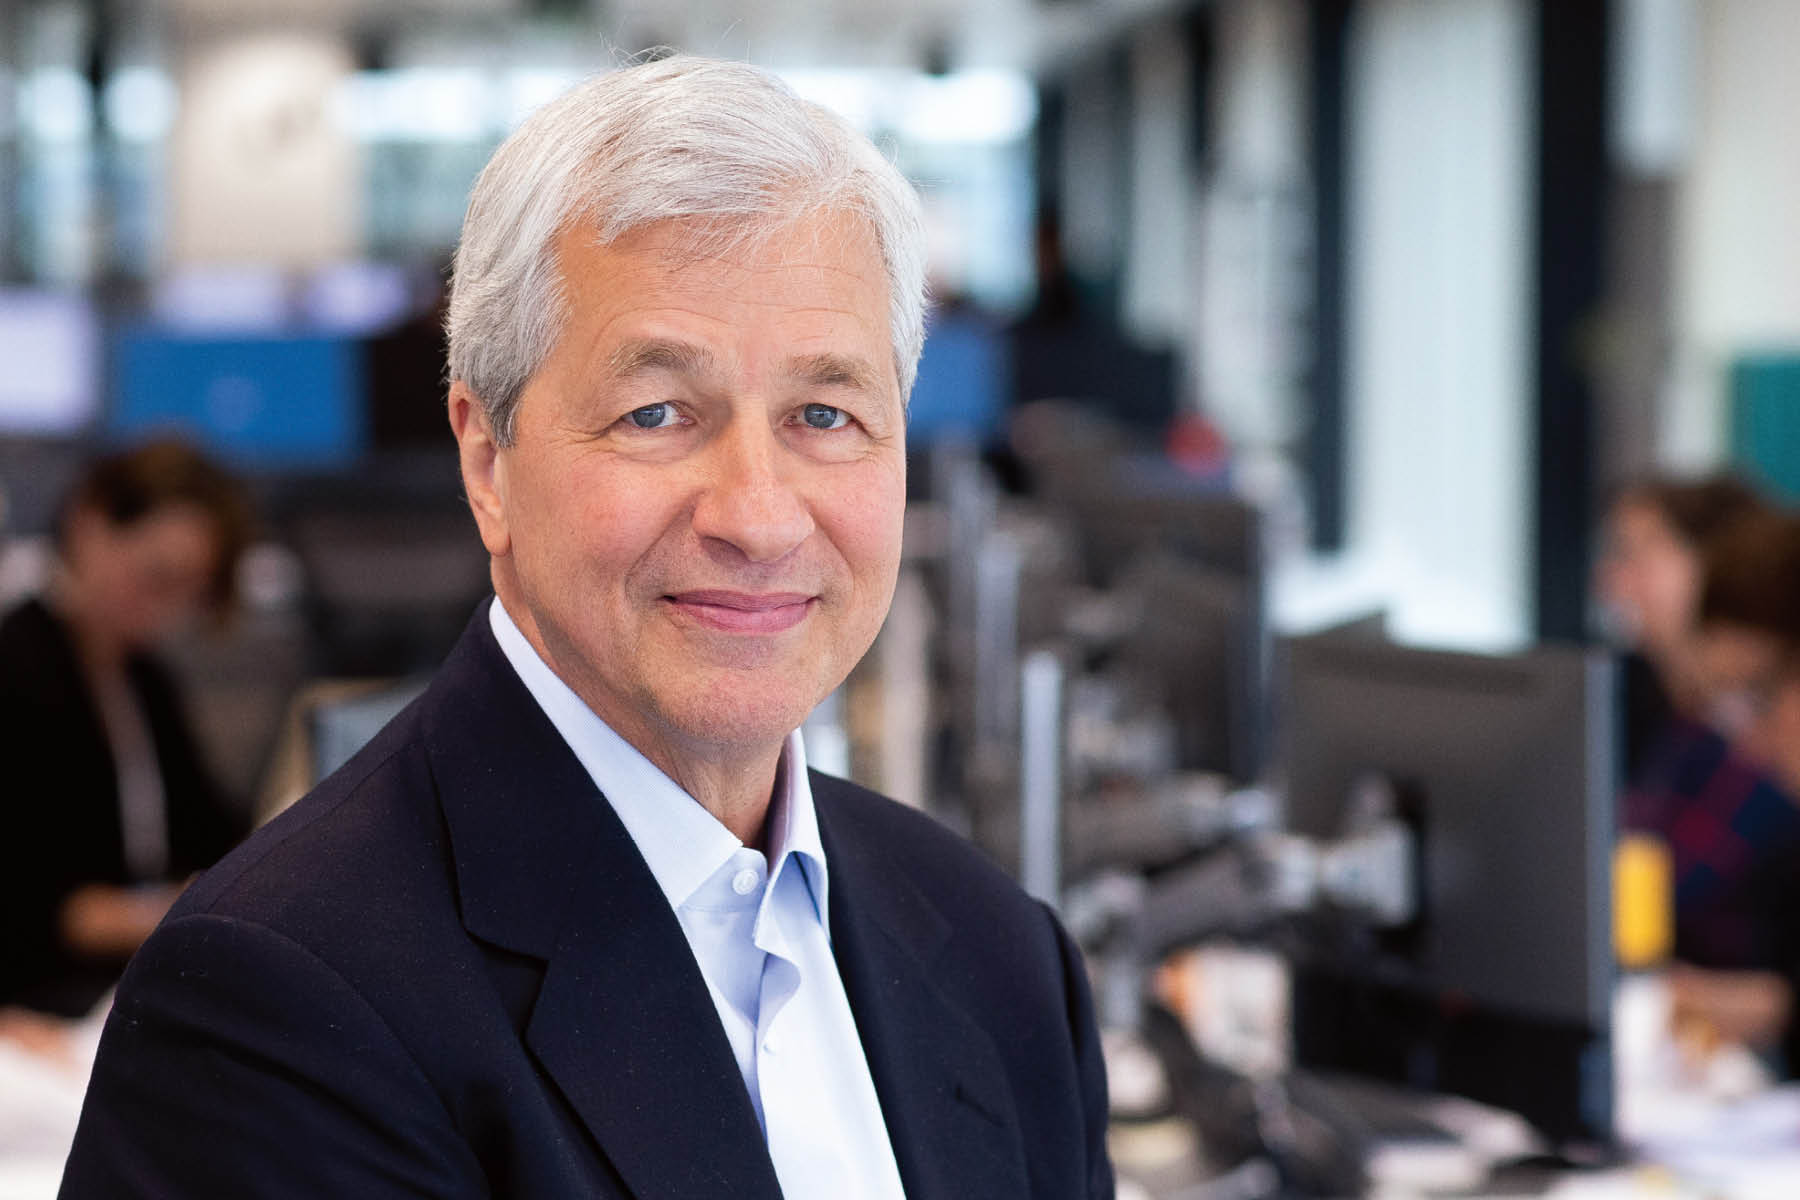 Jamie Dimon on “dealing with an extraordinary crisis”